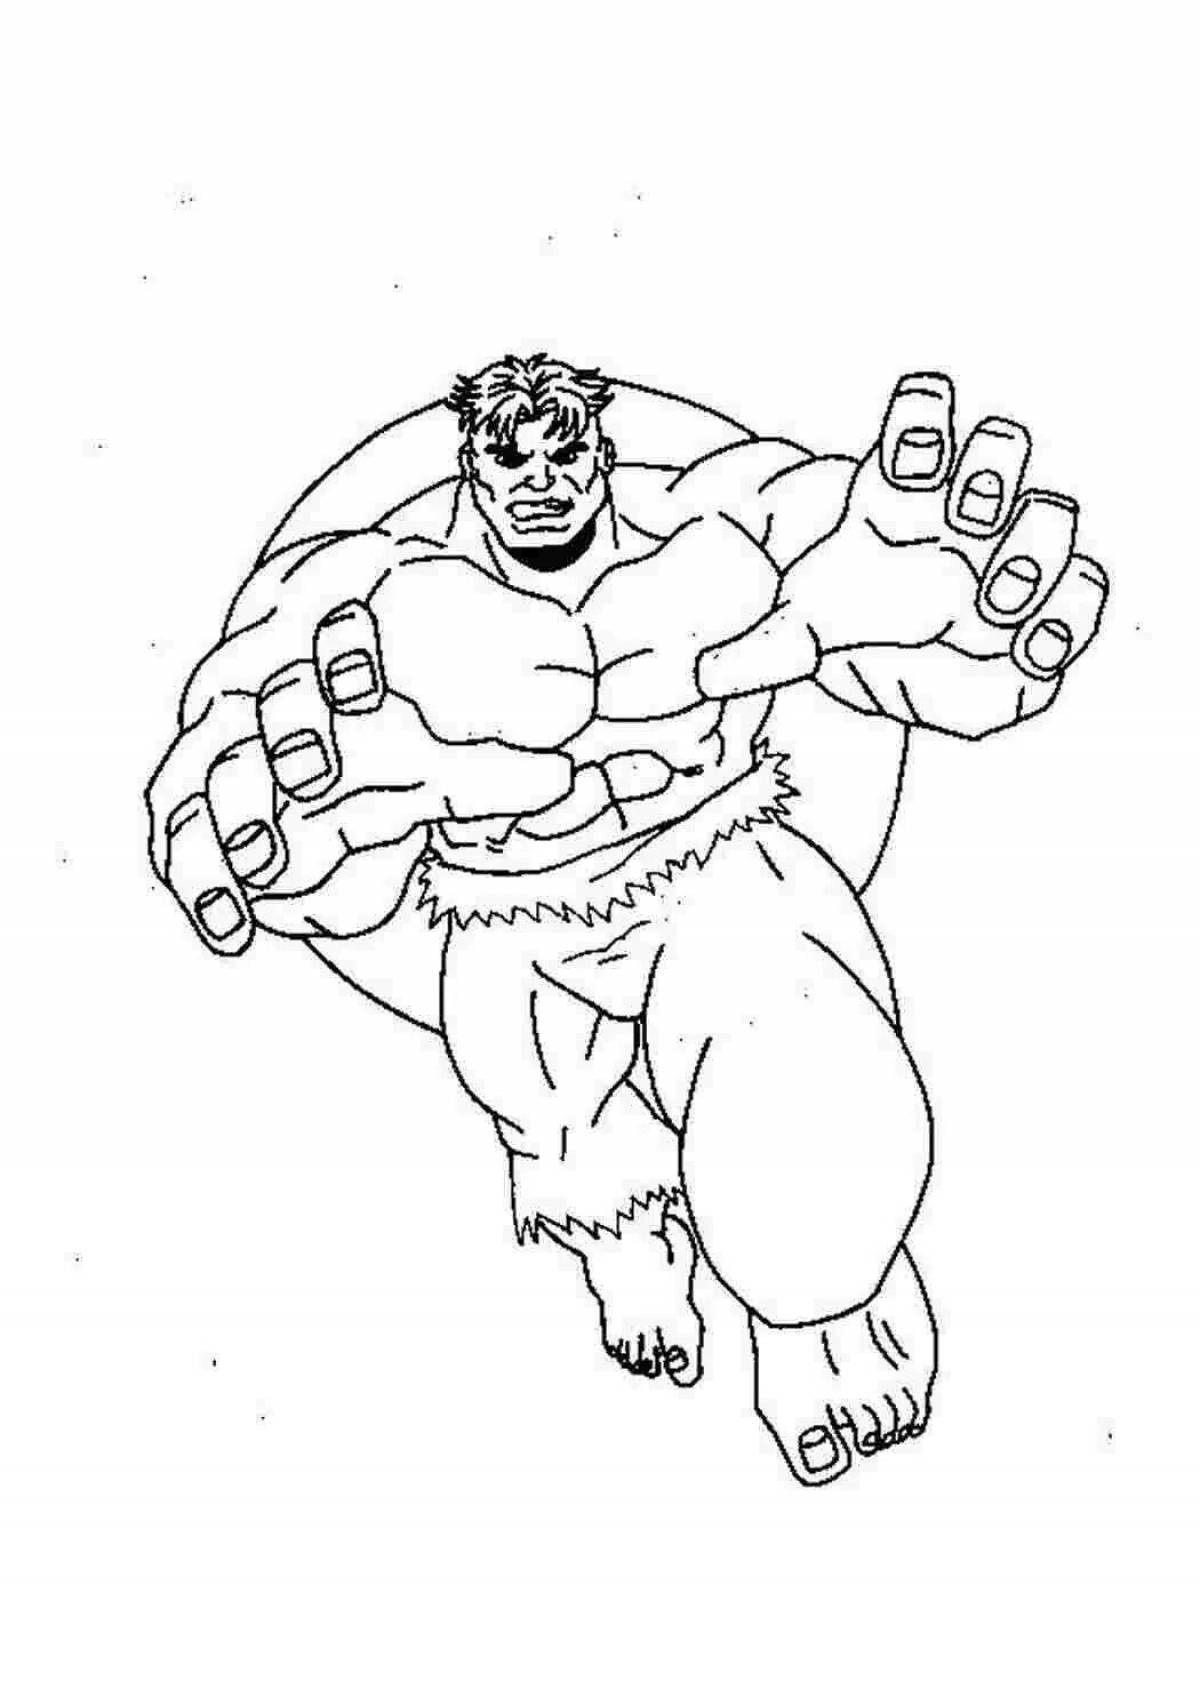 Amazing Hulk coloring book for kids